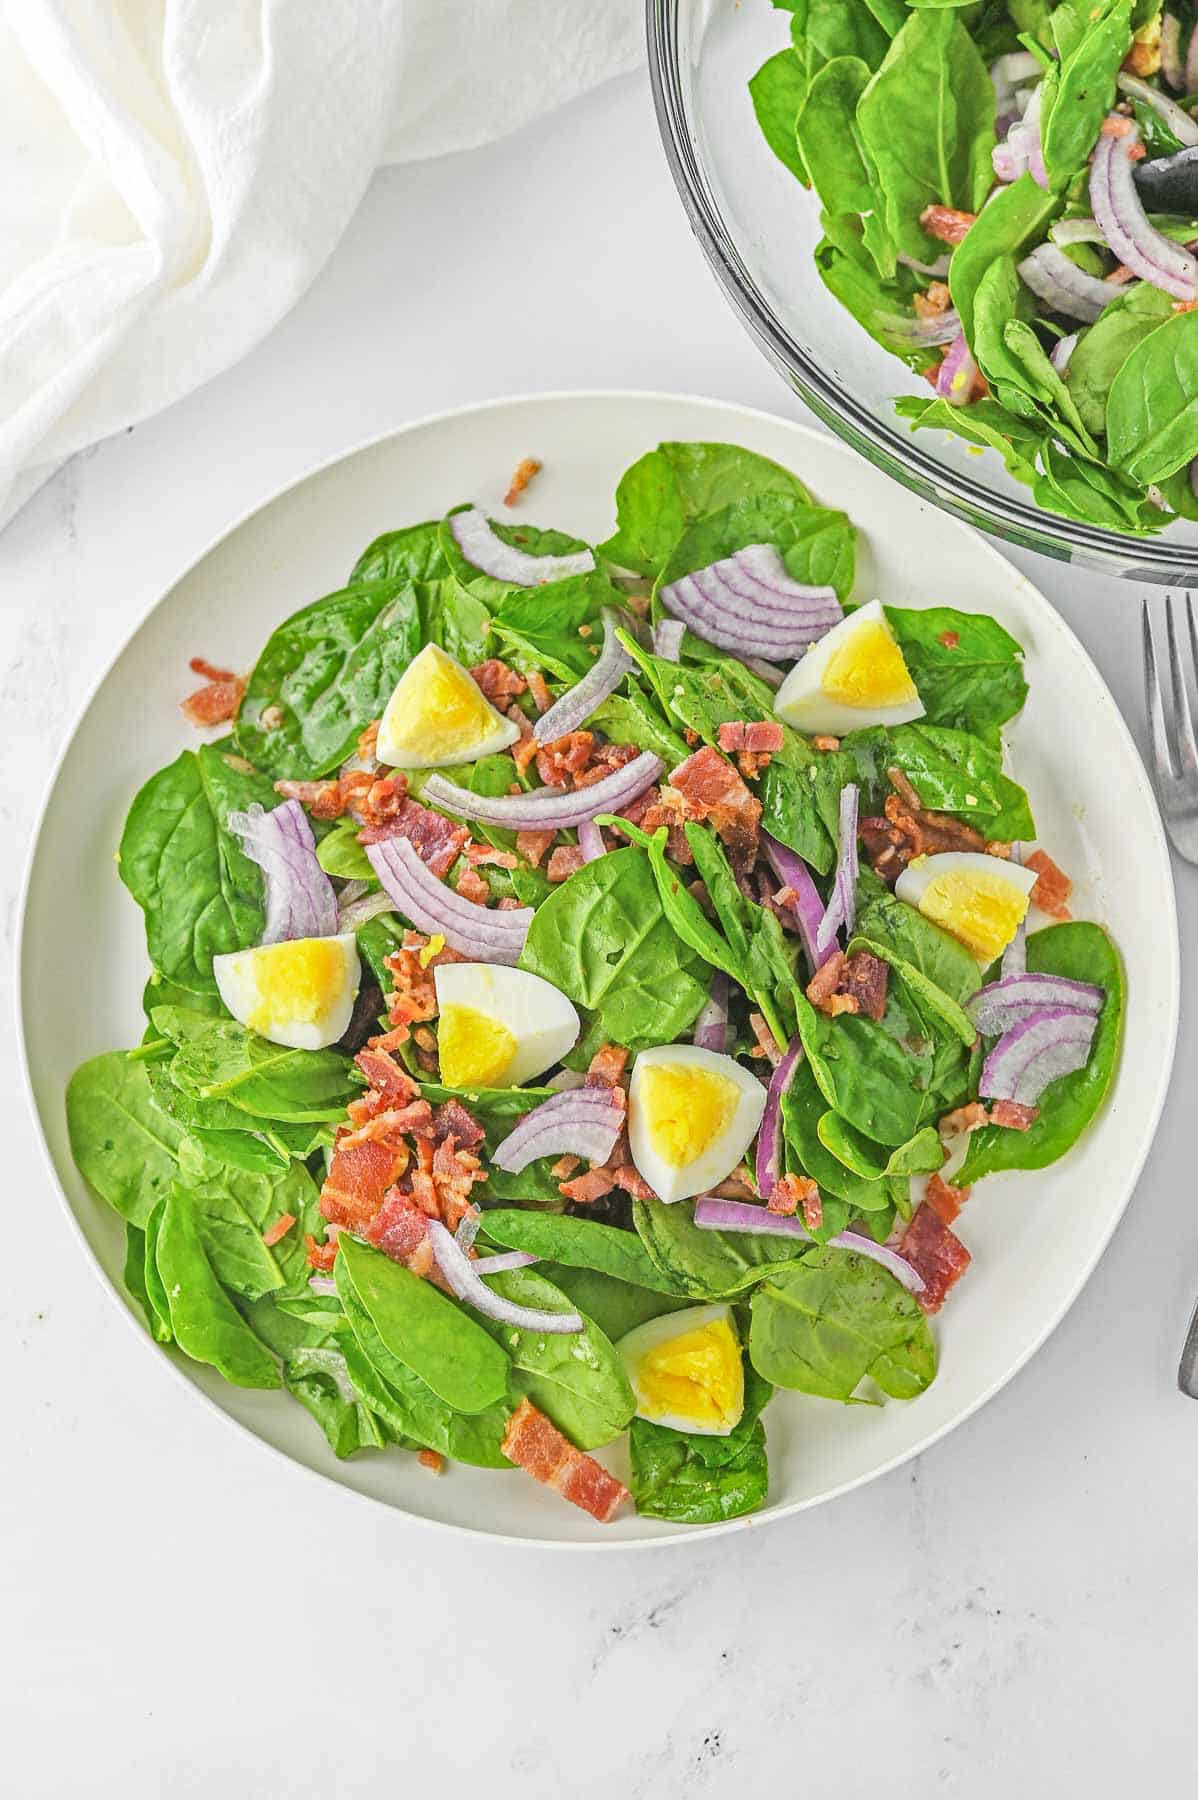 Spinach salad in a white bowl.